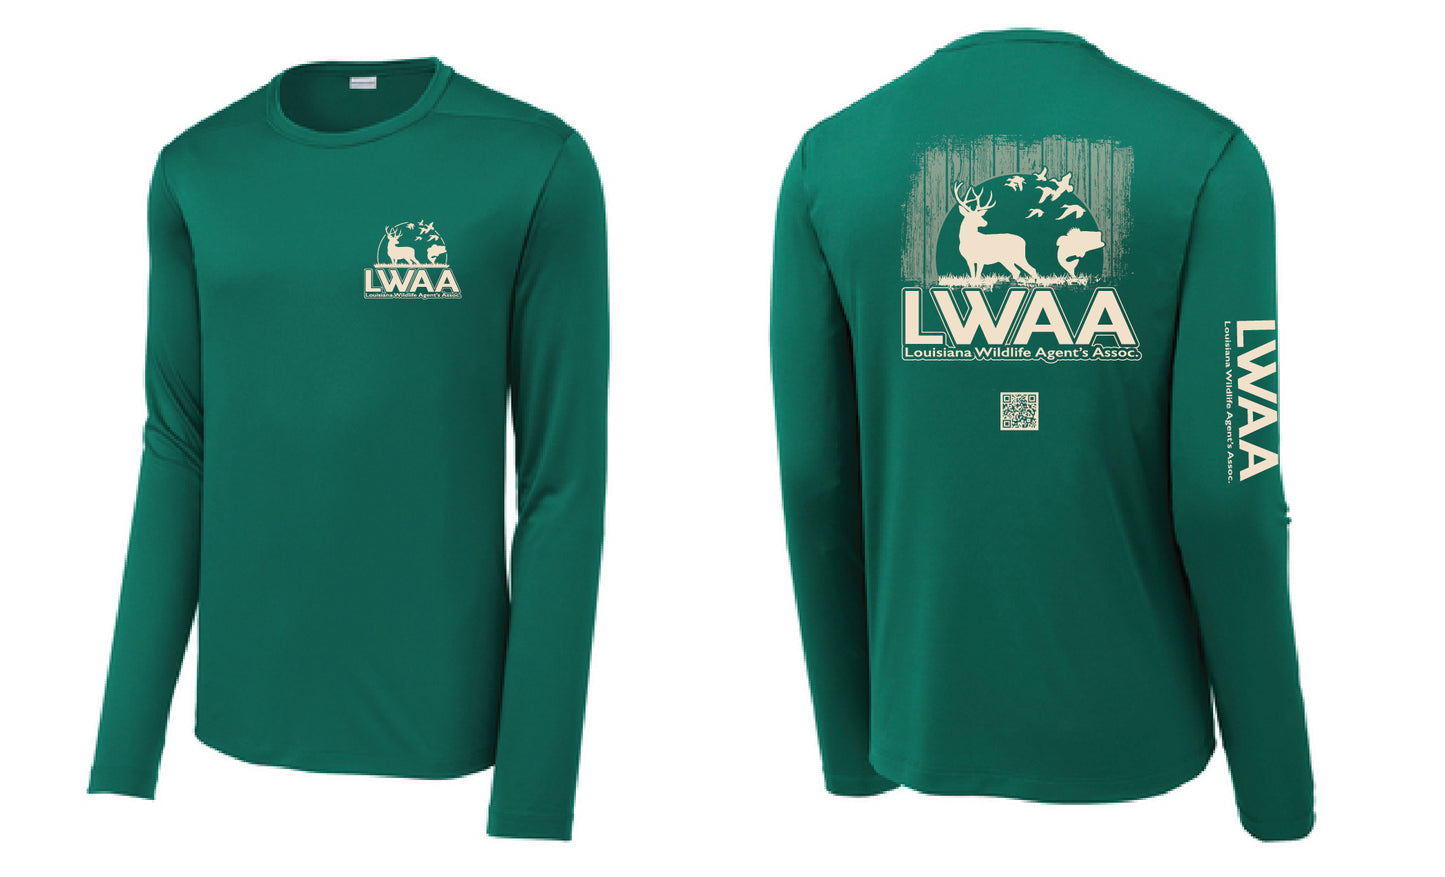 LWAA Agent Dry Fit Long Sleeve (Hunting Scene)